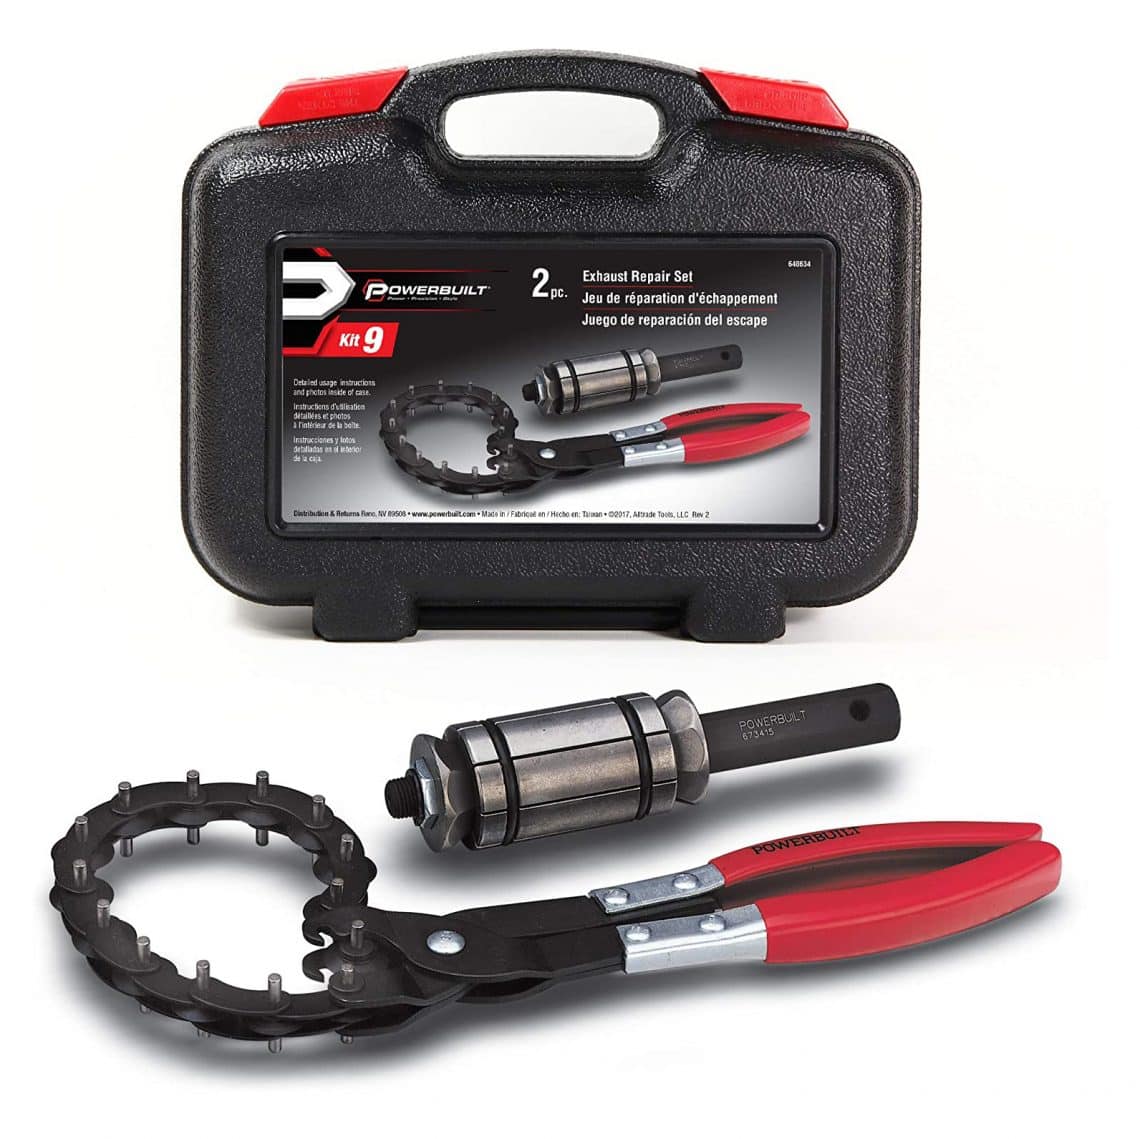 Top 10 Best Exhaust Pipe Cutters in 2021 Reviews | Buyer's Guide